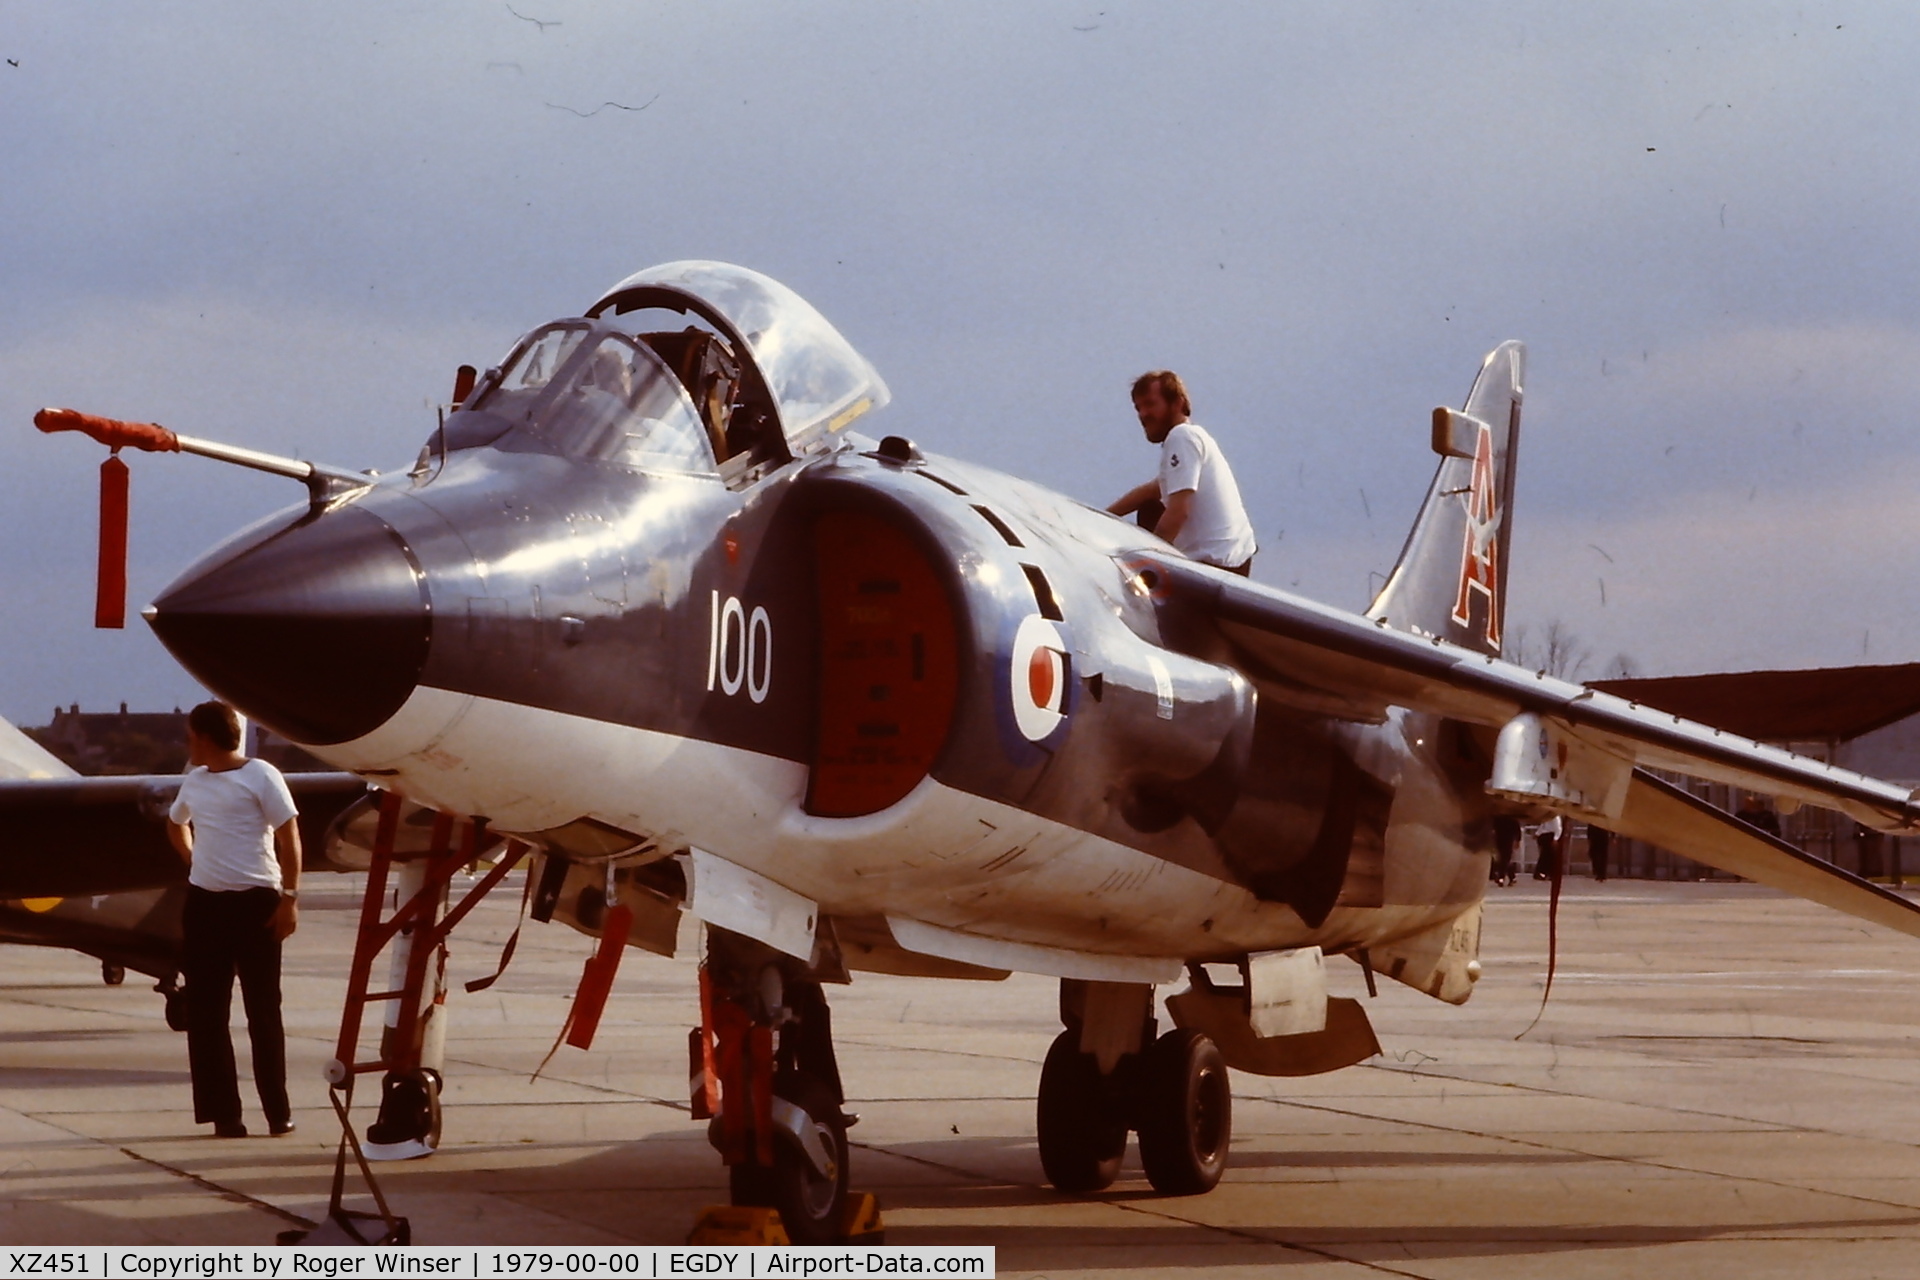 XZ451, 1979 British Aerospace Sea Harrier FRS.1 C/N 41H-912005, Coded 100/VL of 700NAS. The first Sea Harrier delivered to the RN. At the RNAS Yeovilton Air Day 1979.